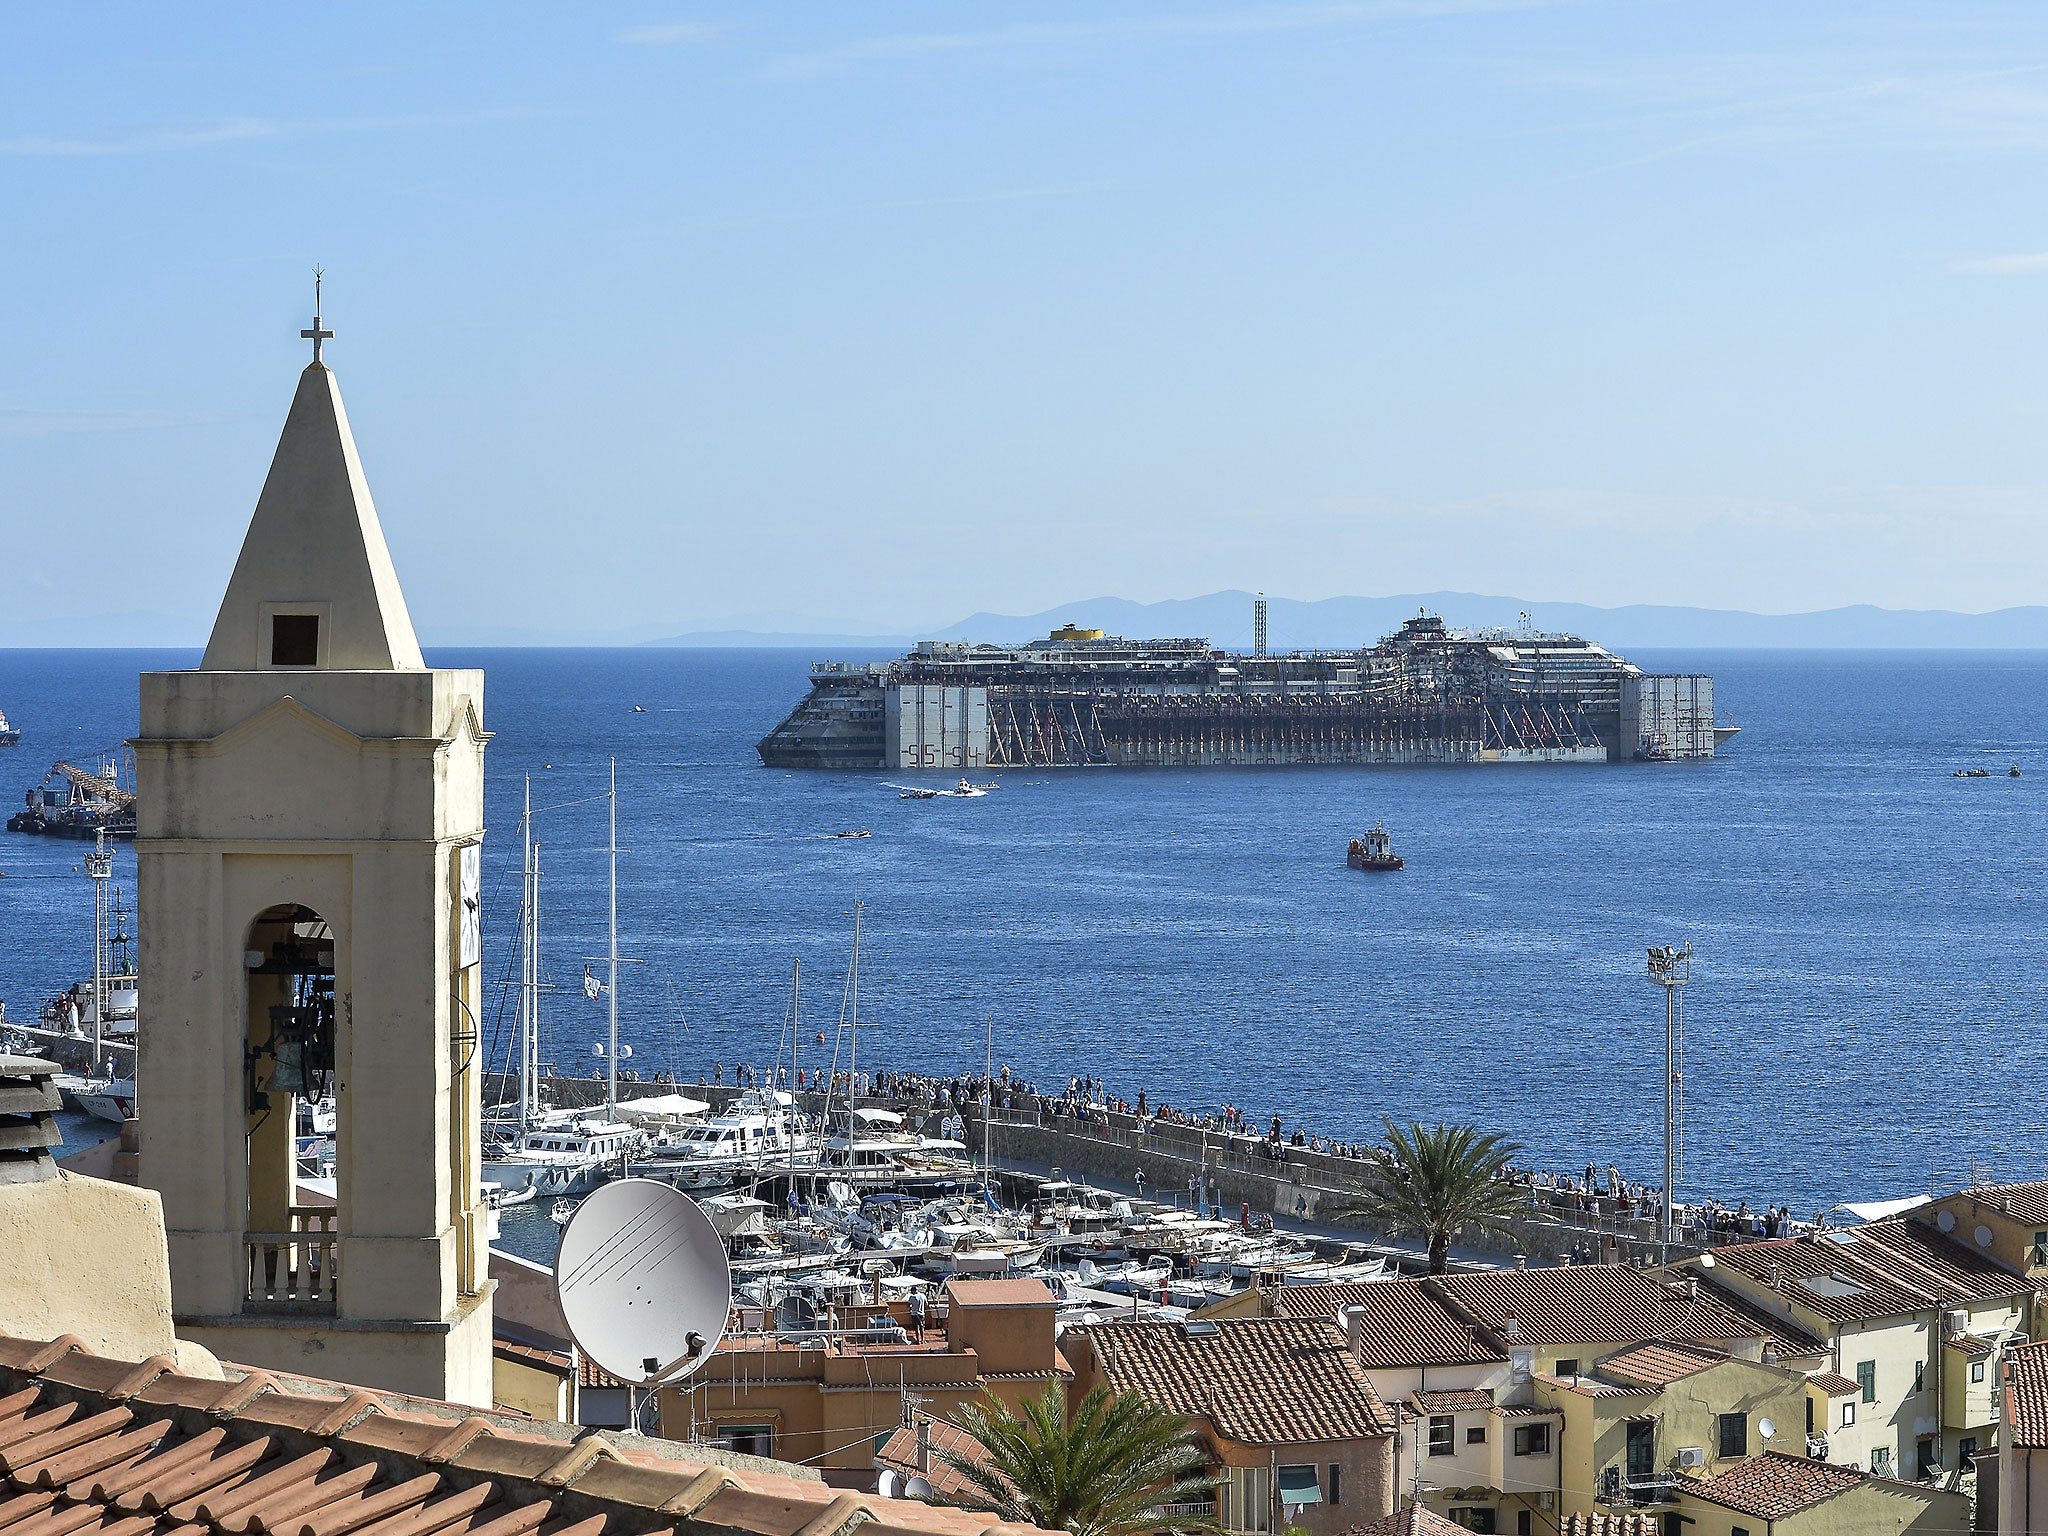 The wreck of the Costa Concordia is towed away from Giglio more than two-and-a-half-years after it sunk. In the foreground is the steeple of the church where many of the survivors were brought for refuge on 13 January 2012